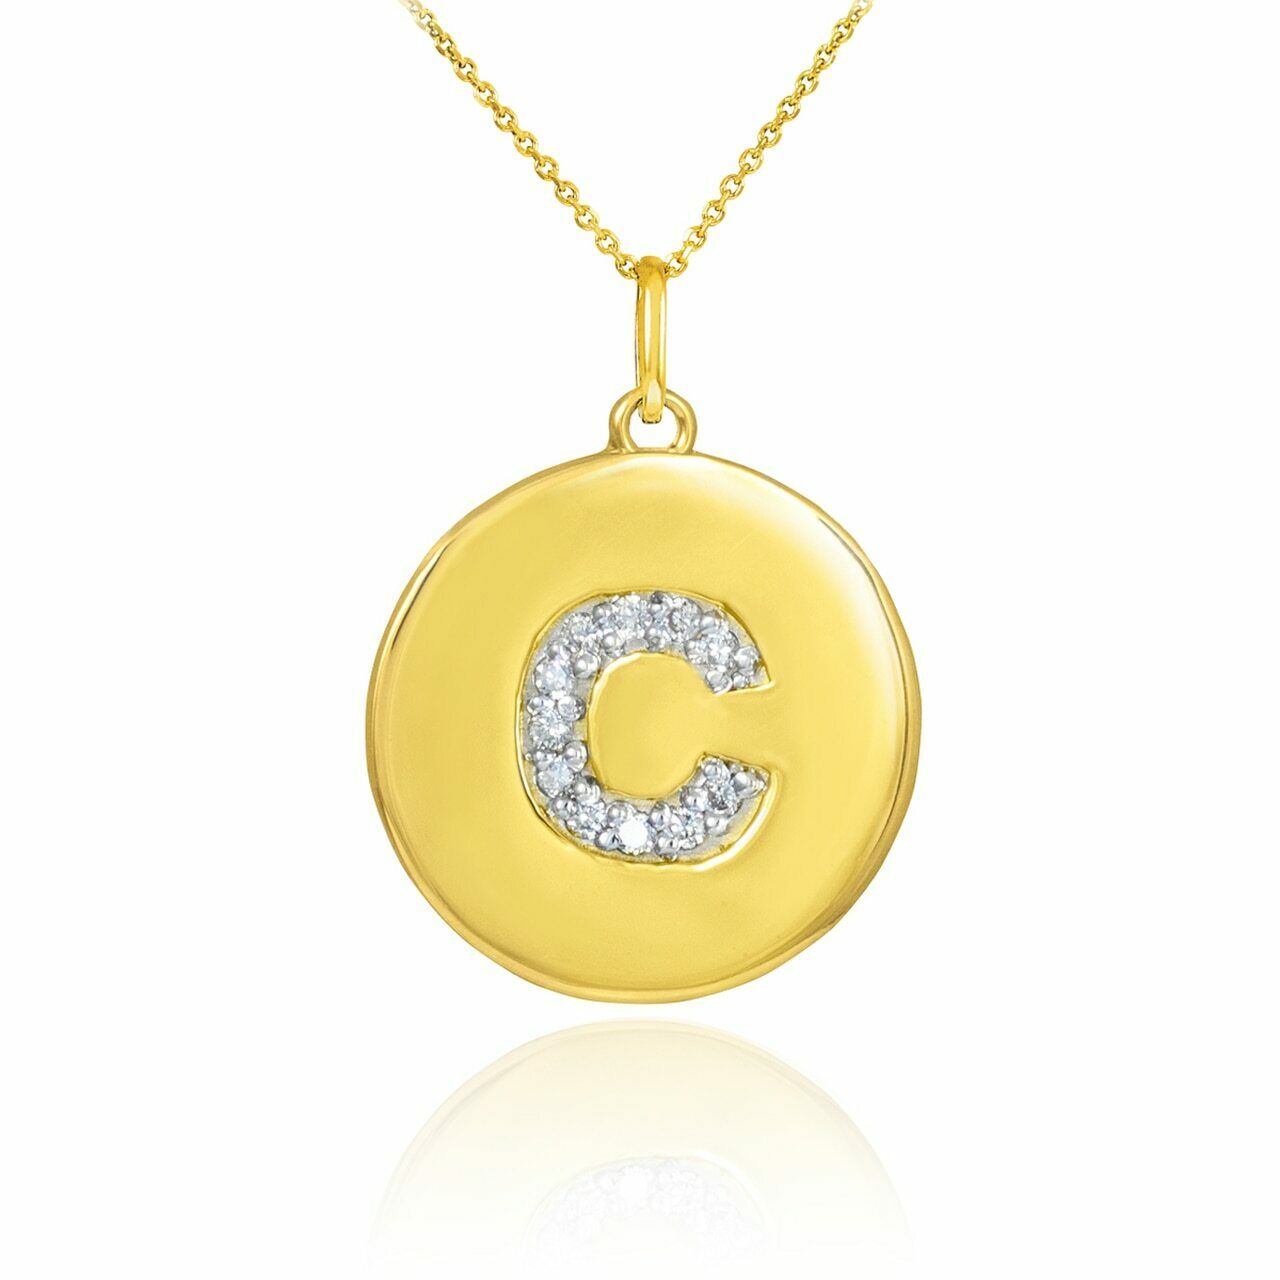 Solid 10k Yellow Gold Letter "C" Initial Diamond Disc Charm Pendant Necklace